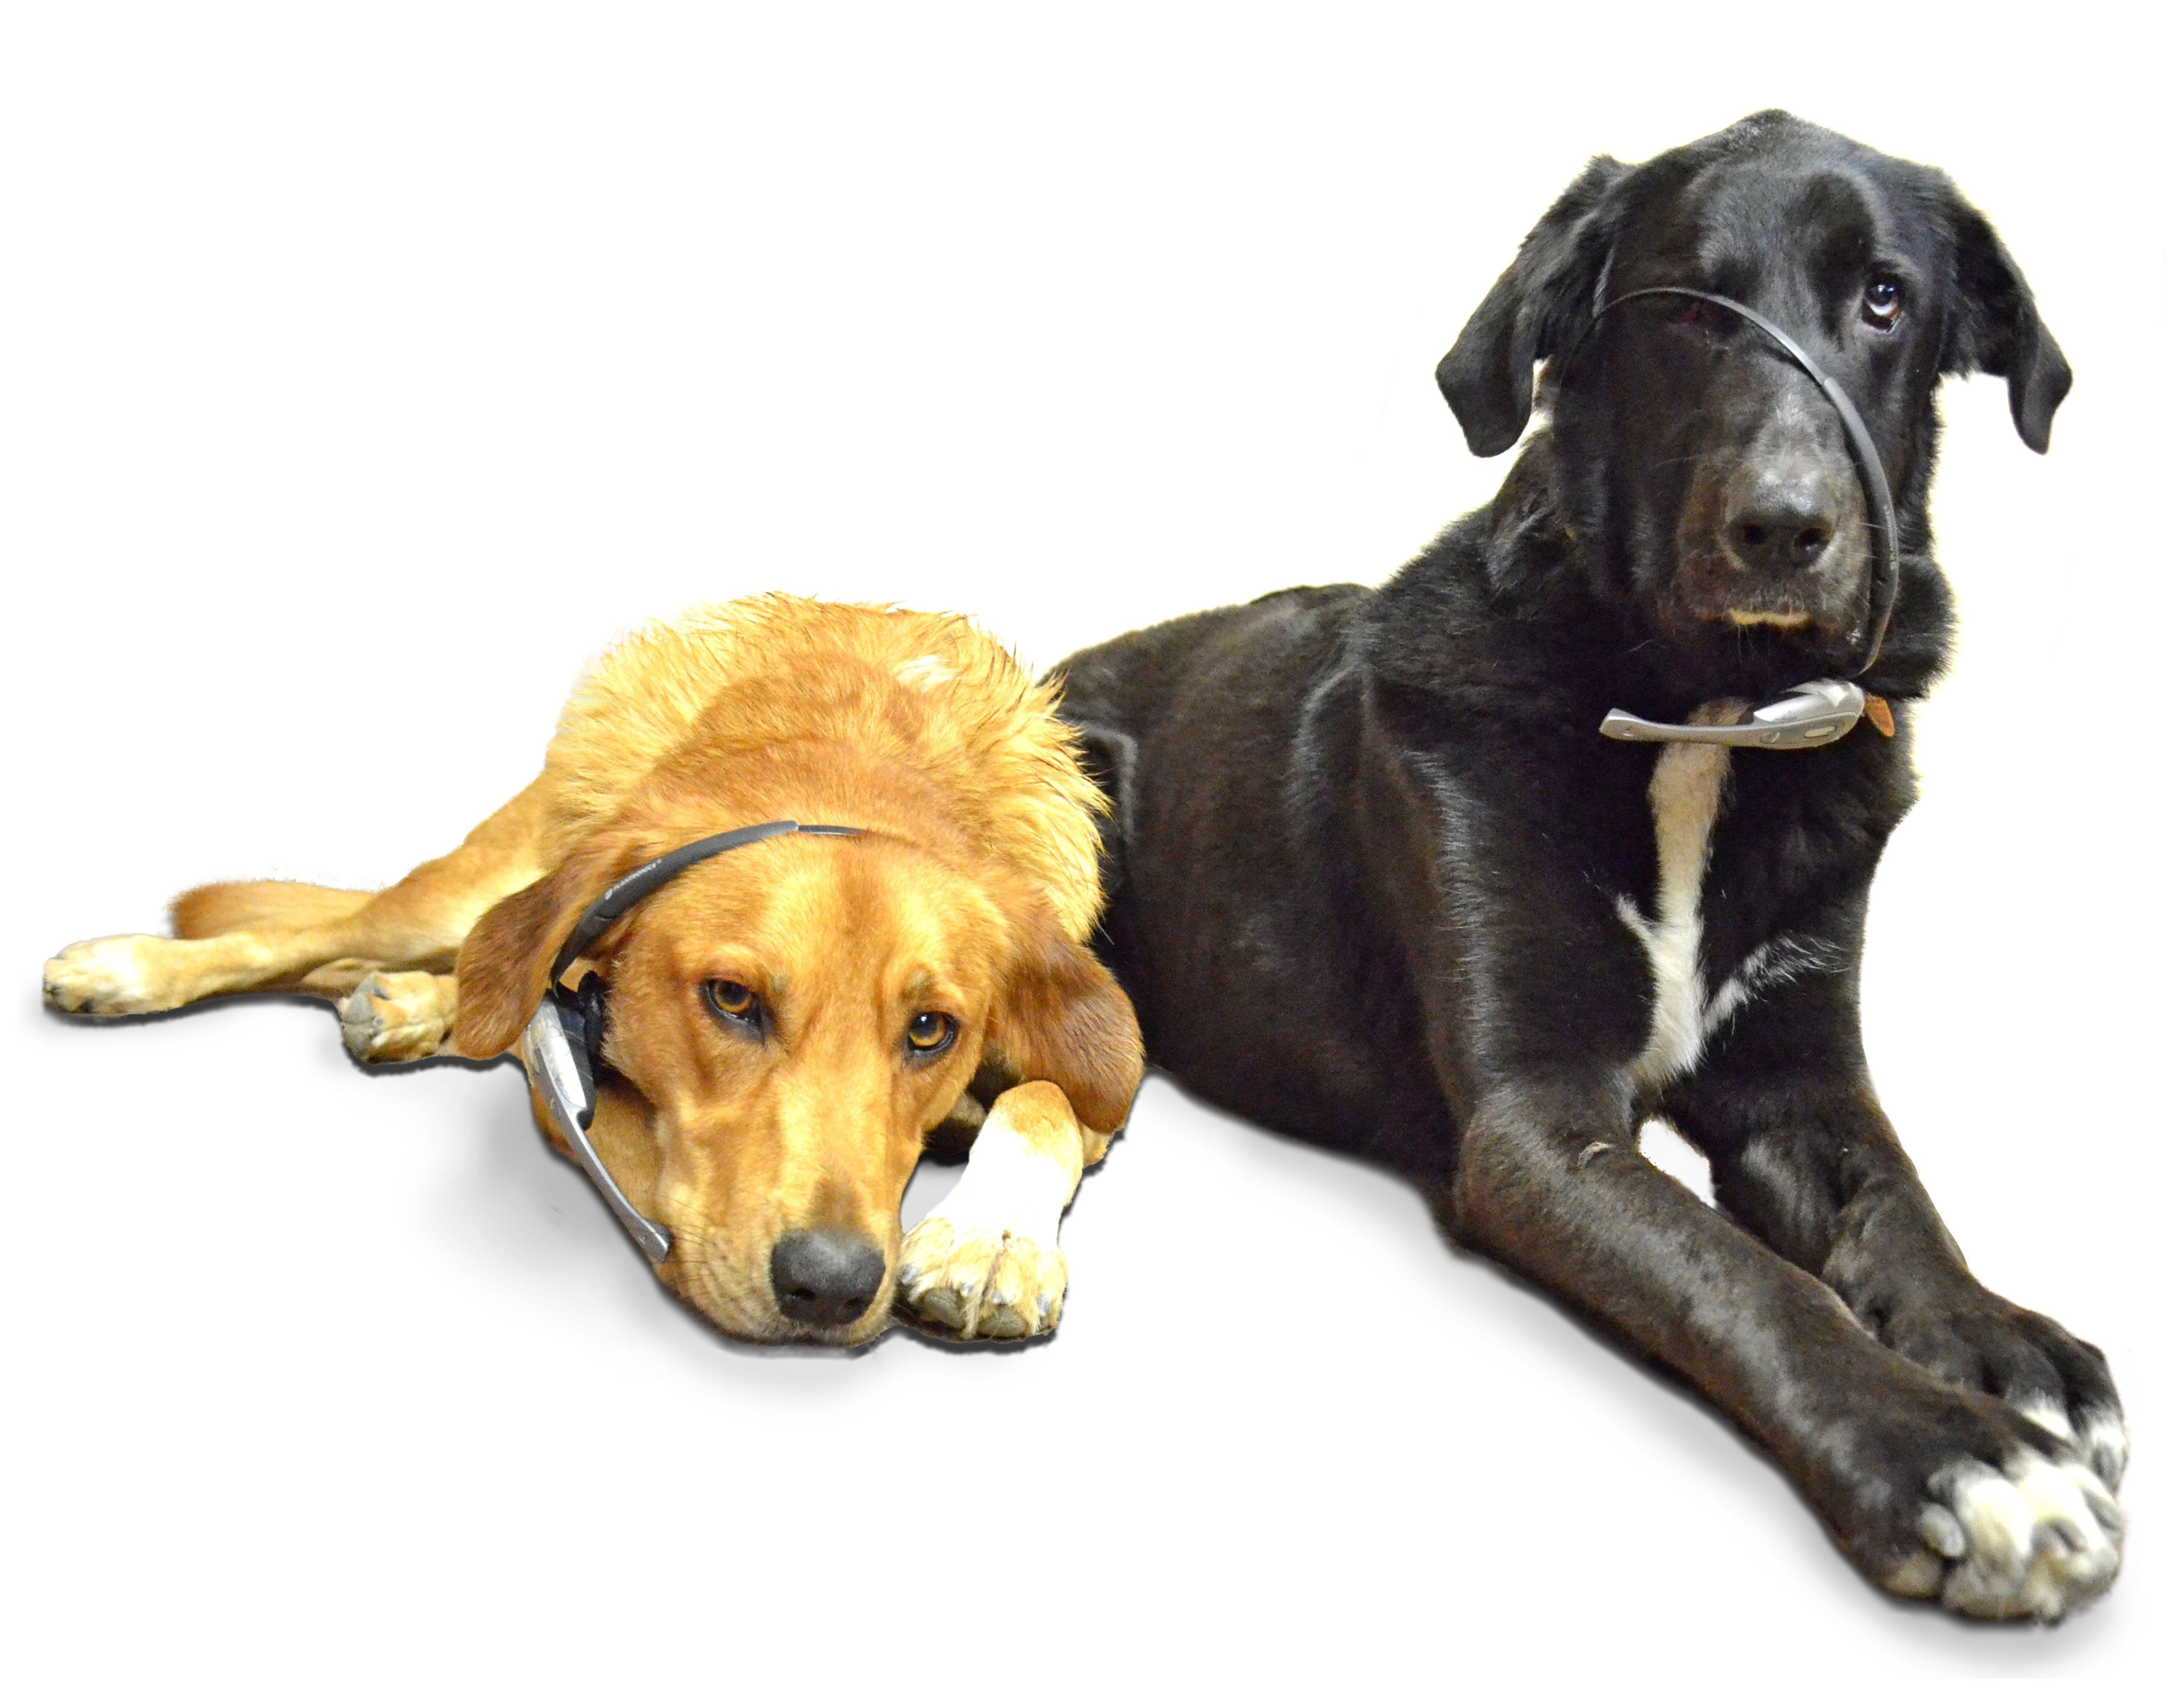 Two Labrador dogs, one black and one gold, wearing black headsets while waiting for in-coming calls.